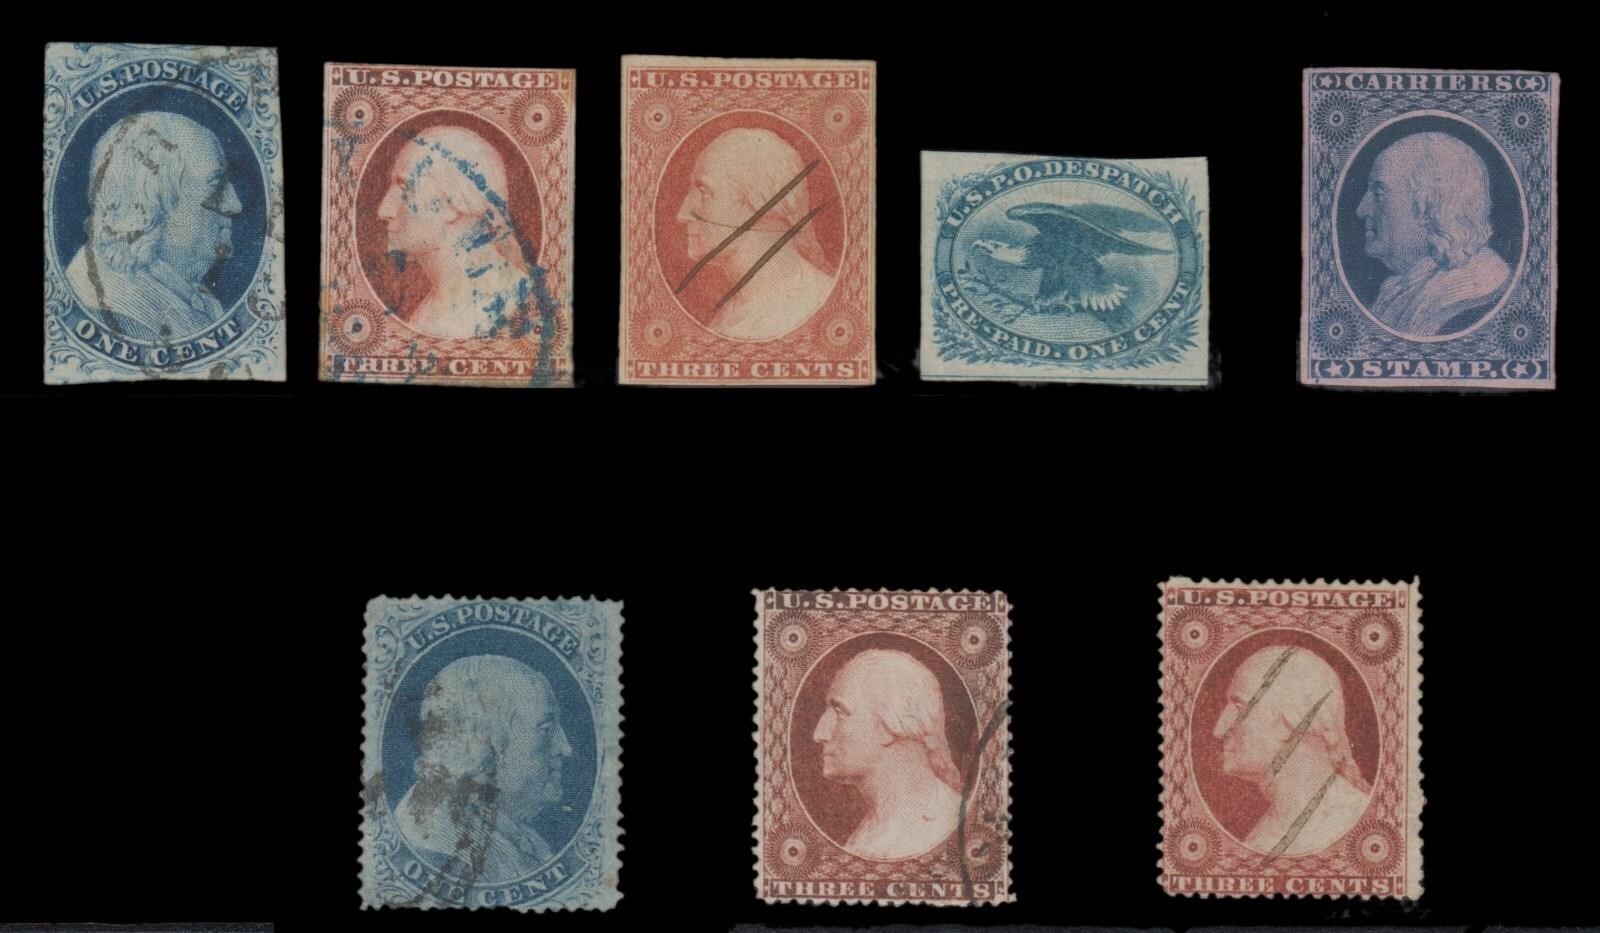 December 6th, 2020 Weekly Stamps & Collectibles Auction